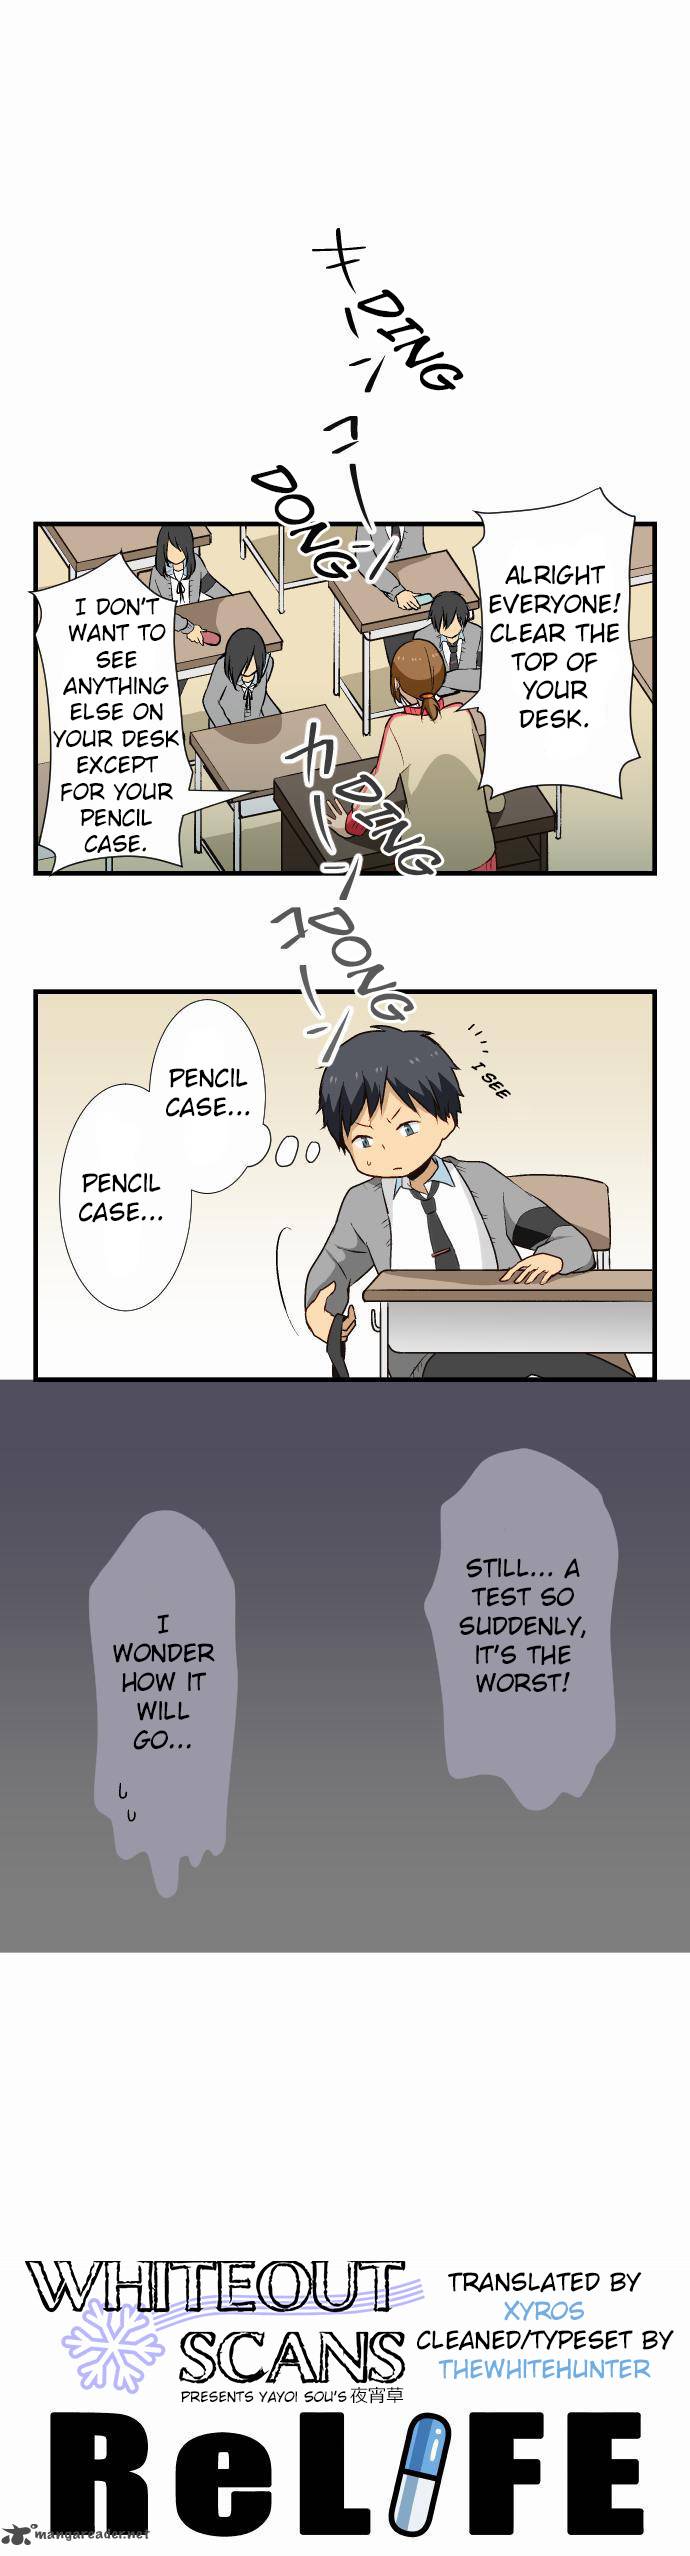 Relife 9 1